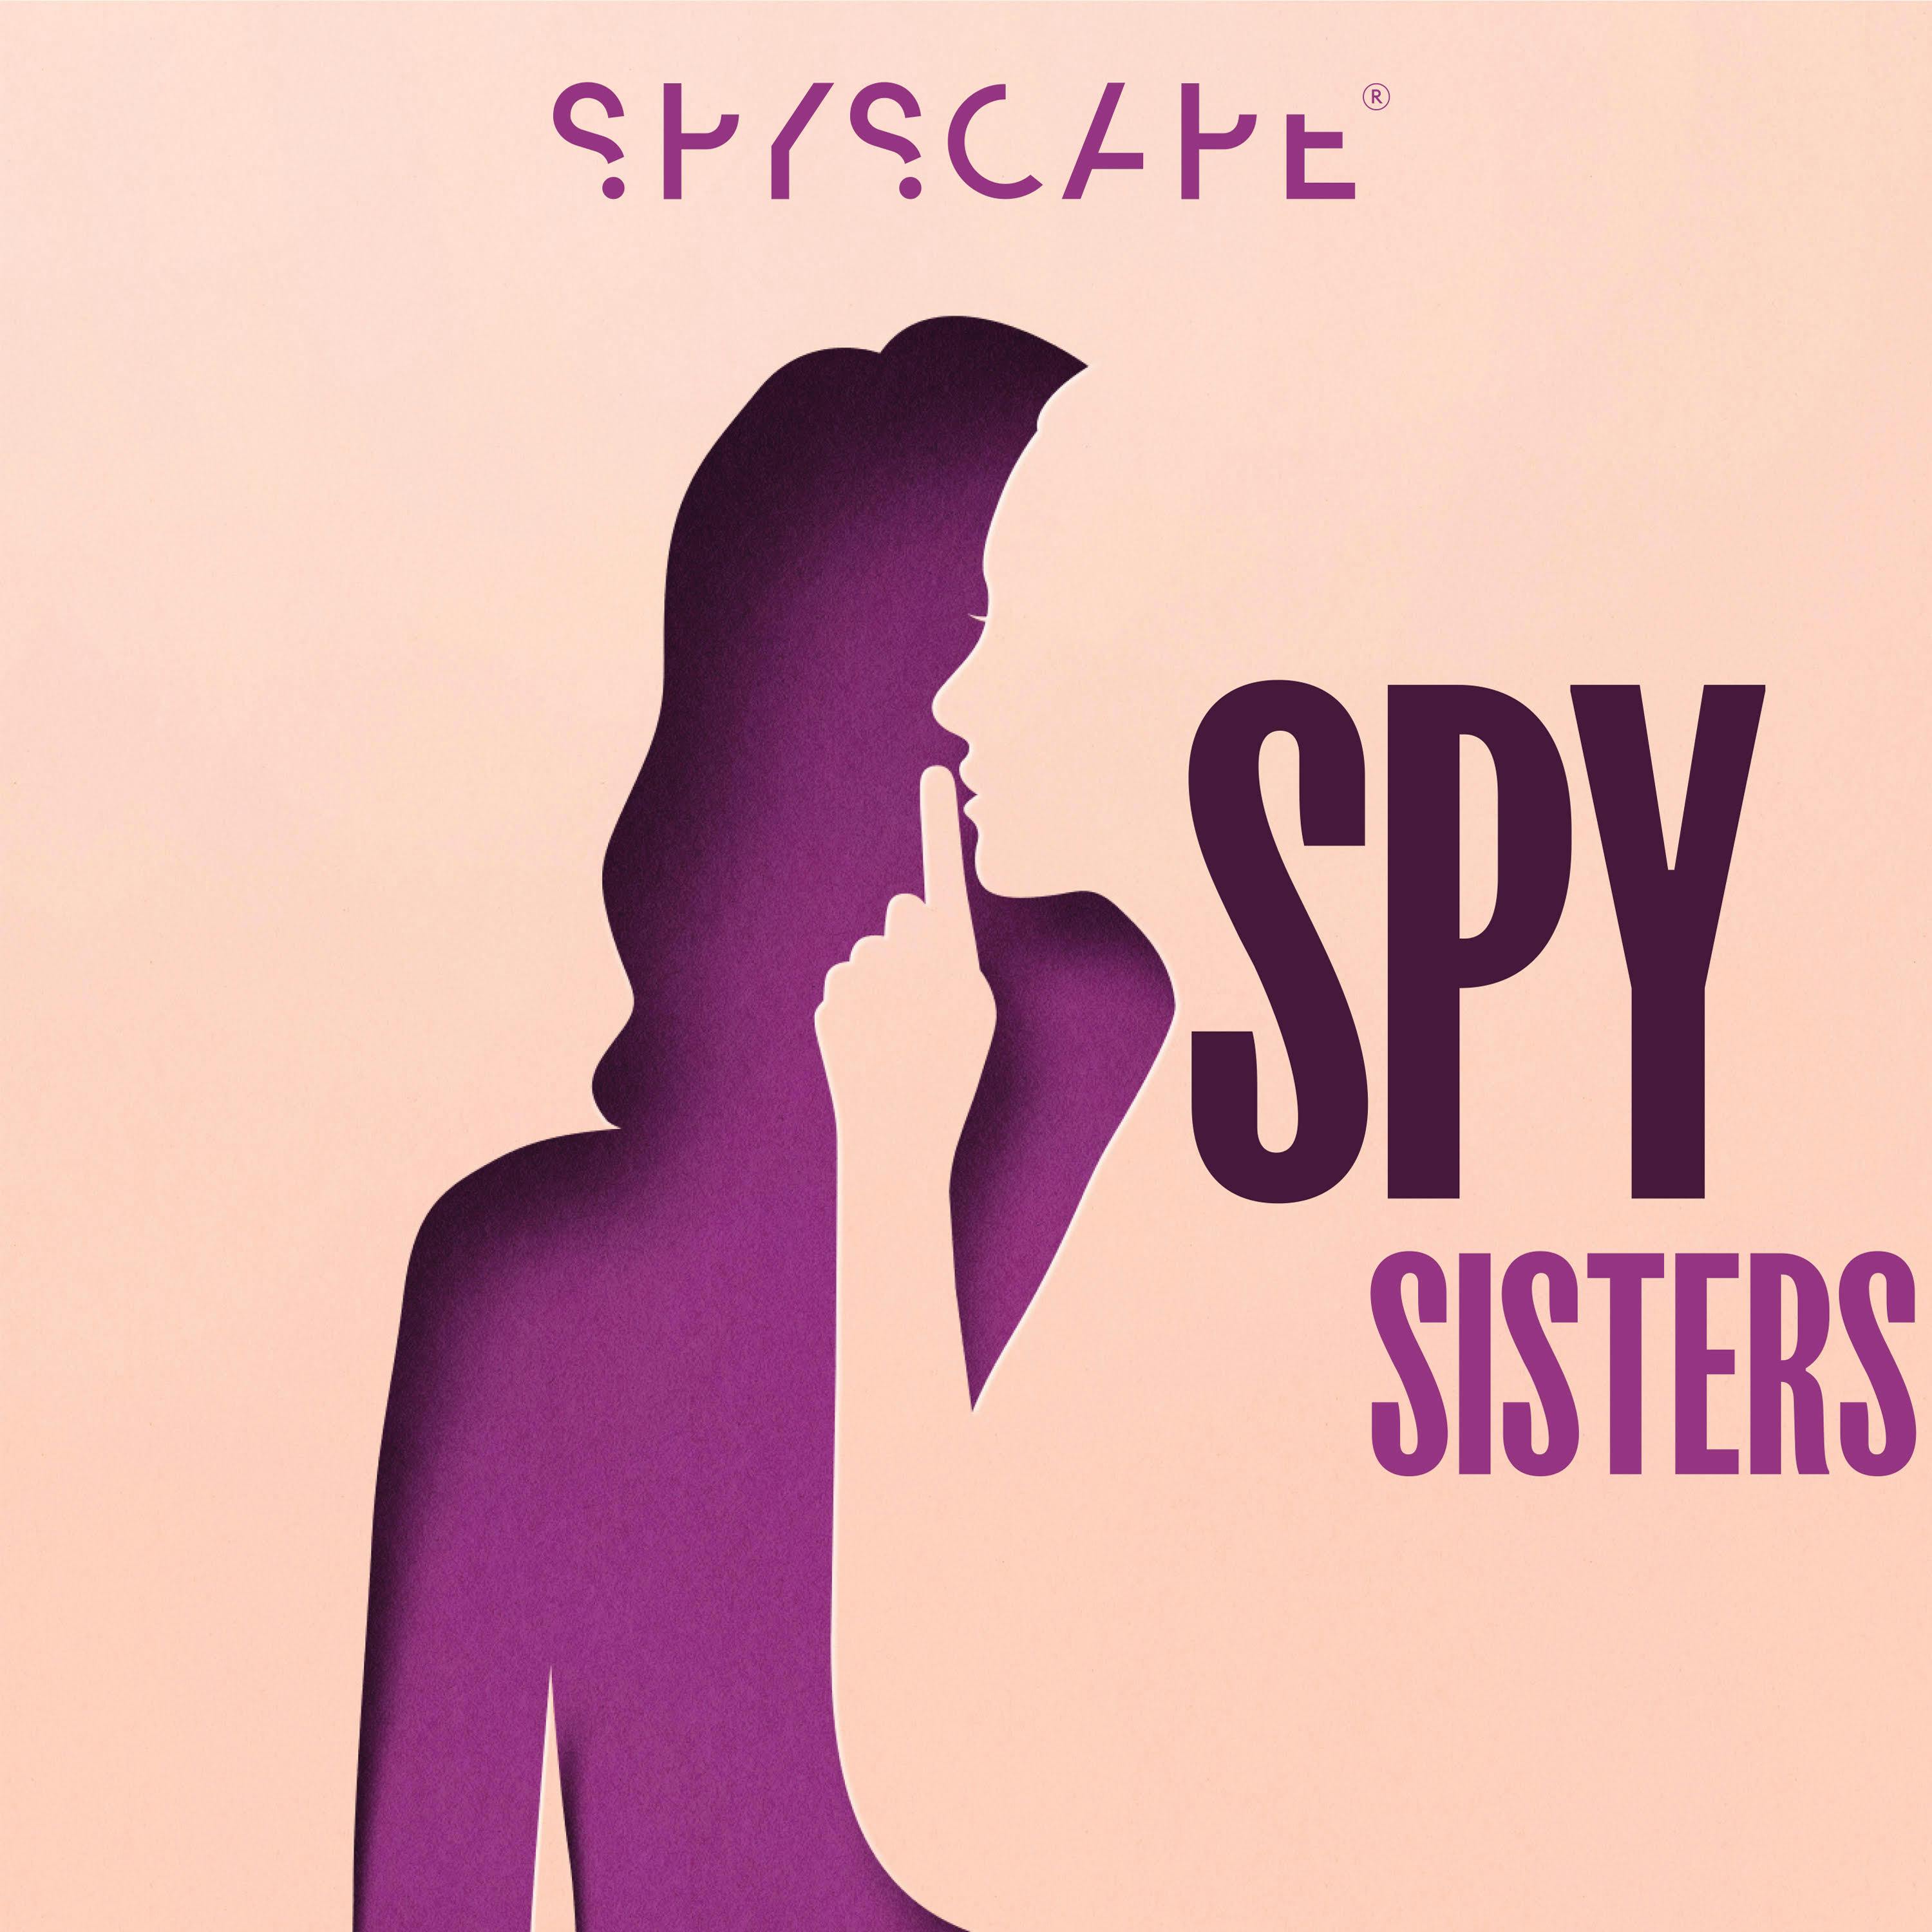 Seven Female Spies